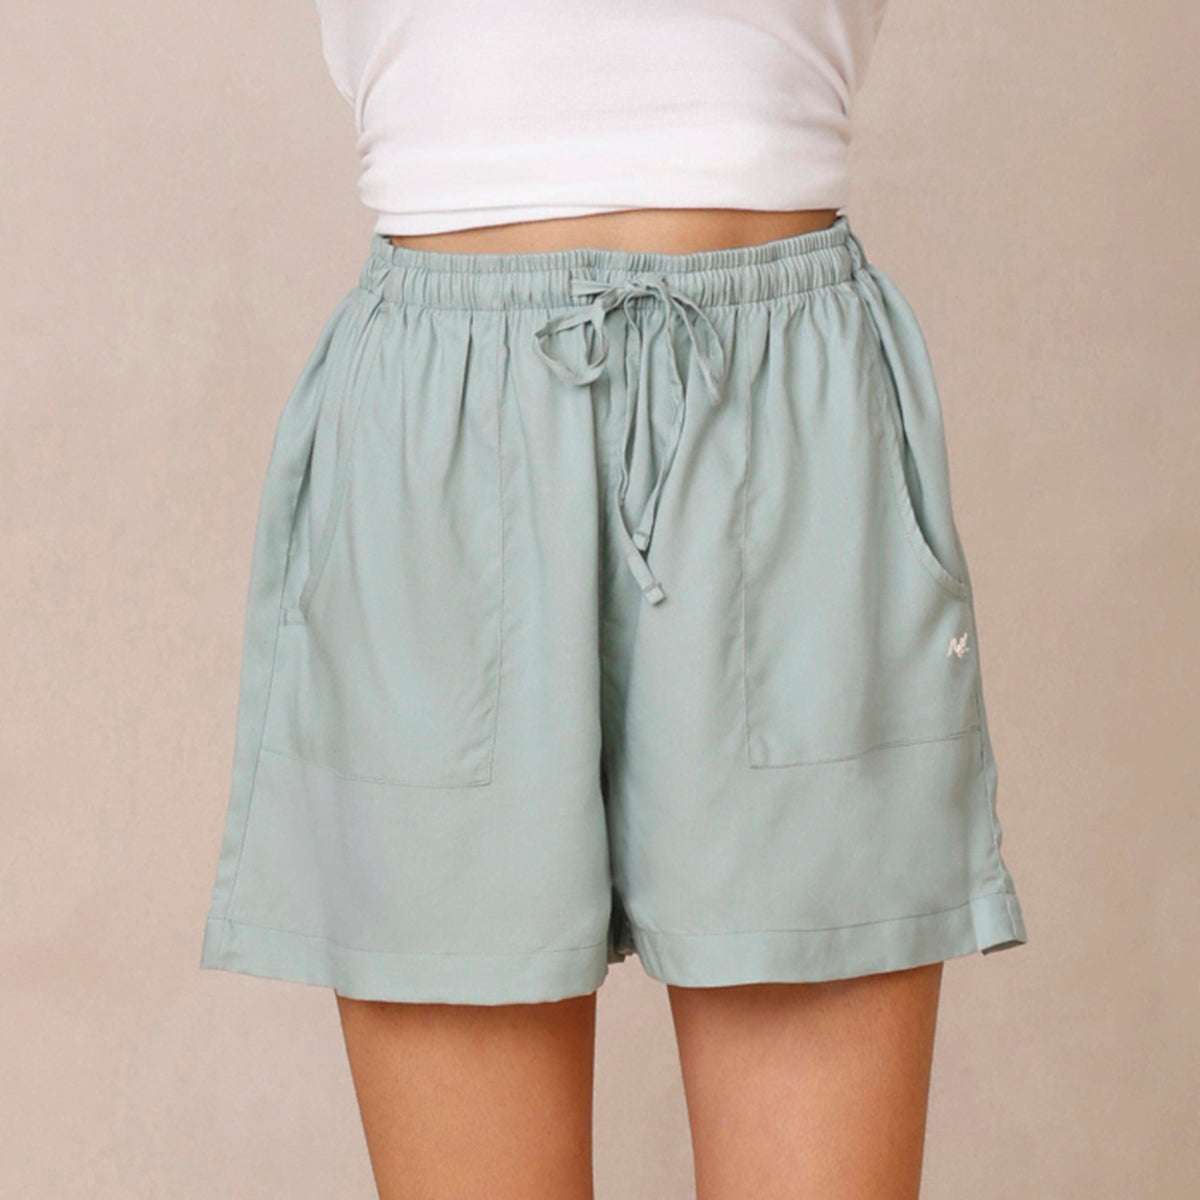 Comfy Vibes All Day Shorts-Mint NYS035